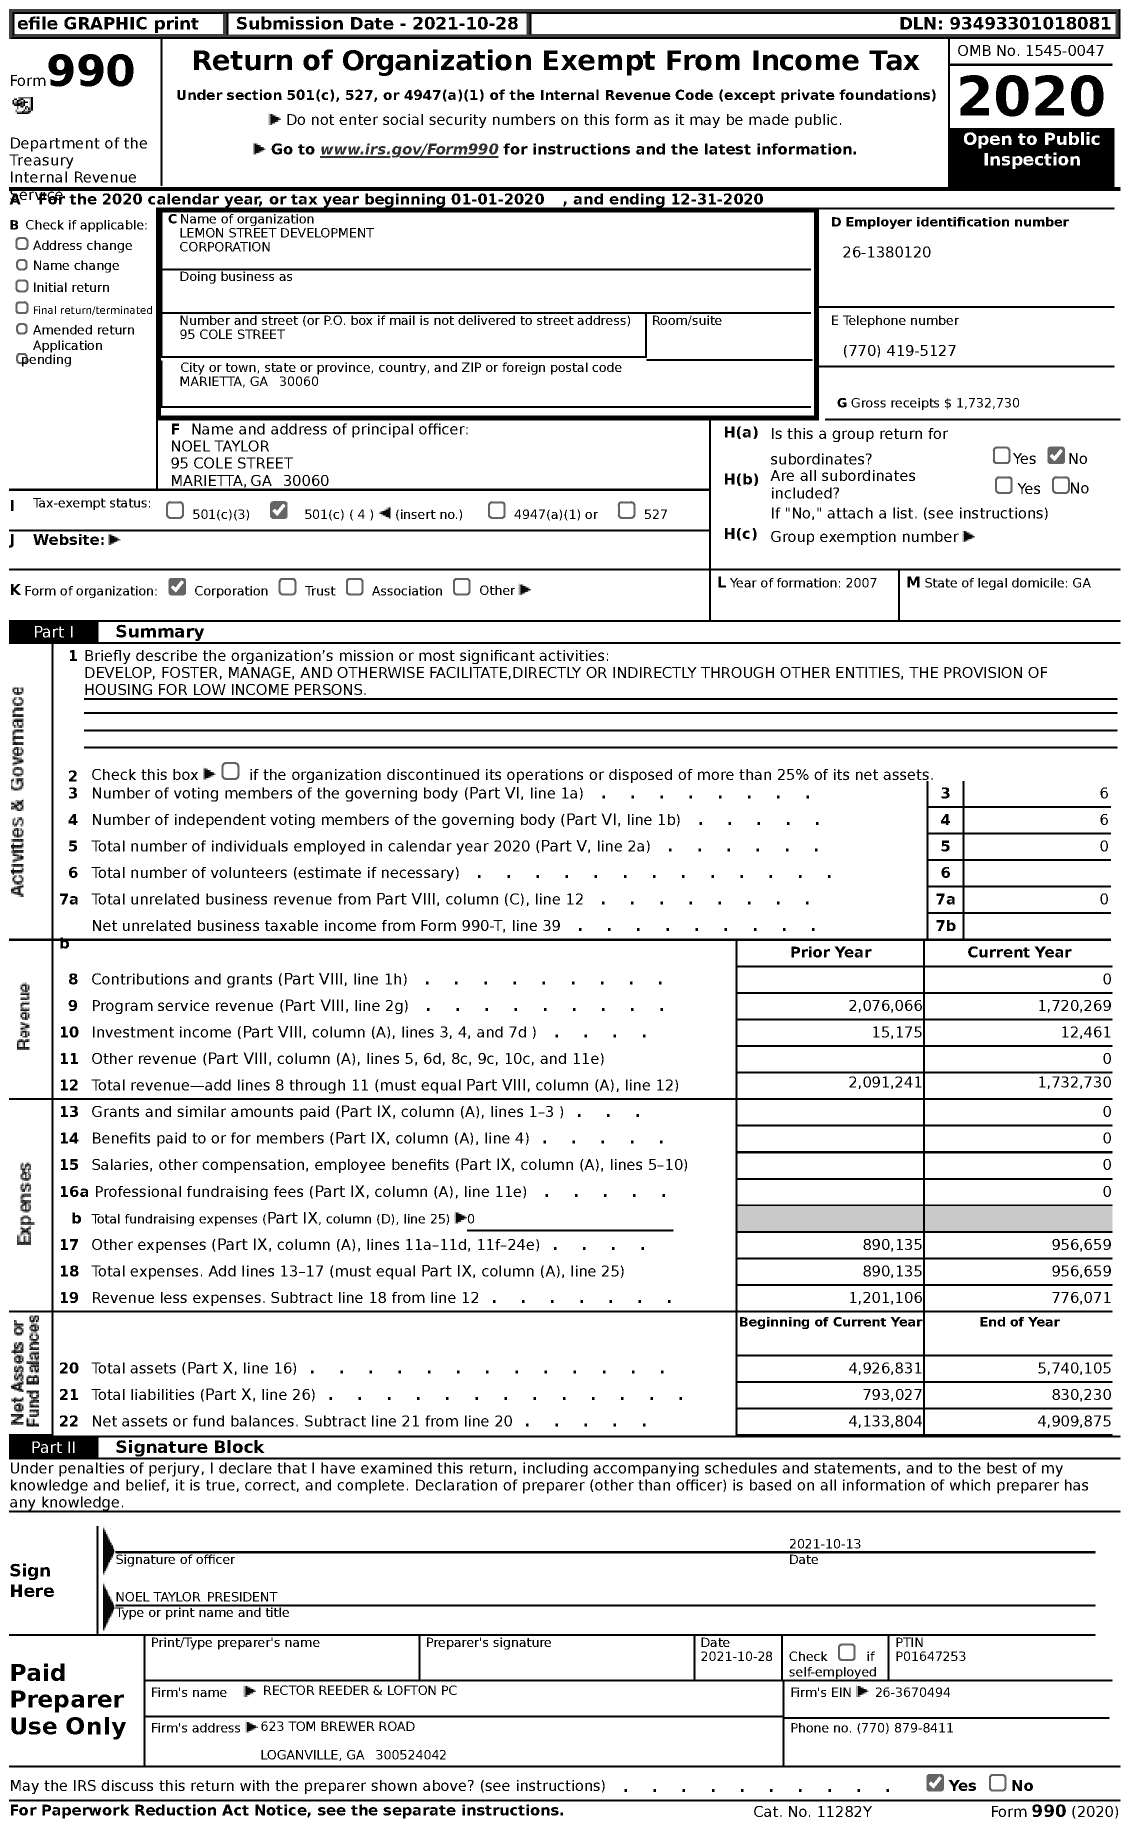 Image of first page of 2020 Form 990 for Lemon Street Development Corporation